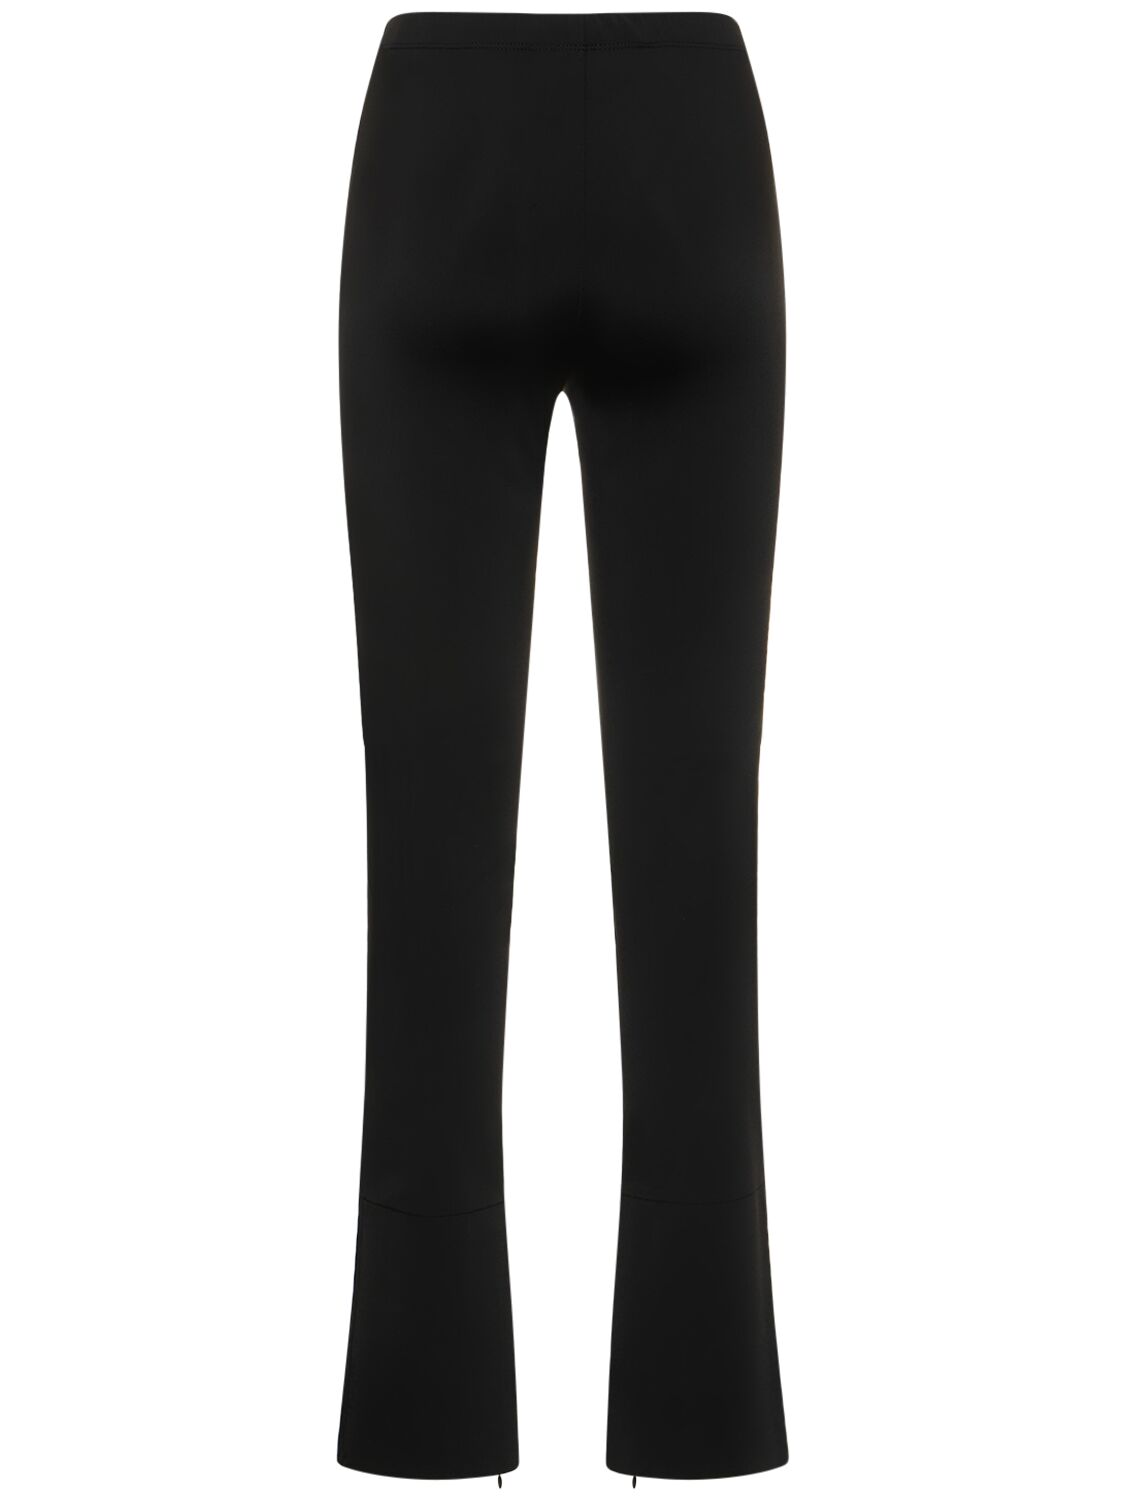 Image of Tailored Stretch Leggings W/logo